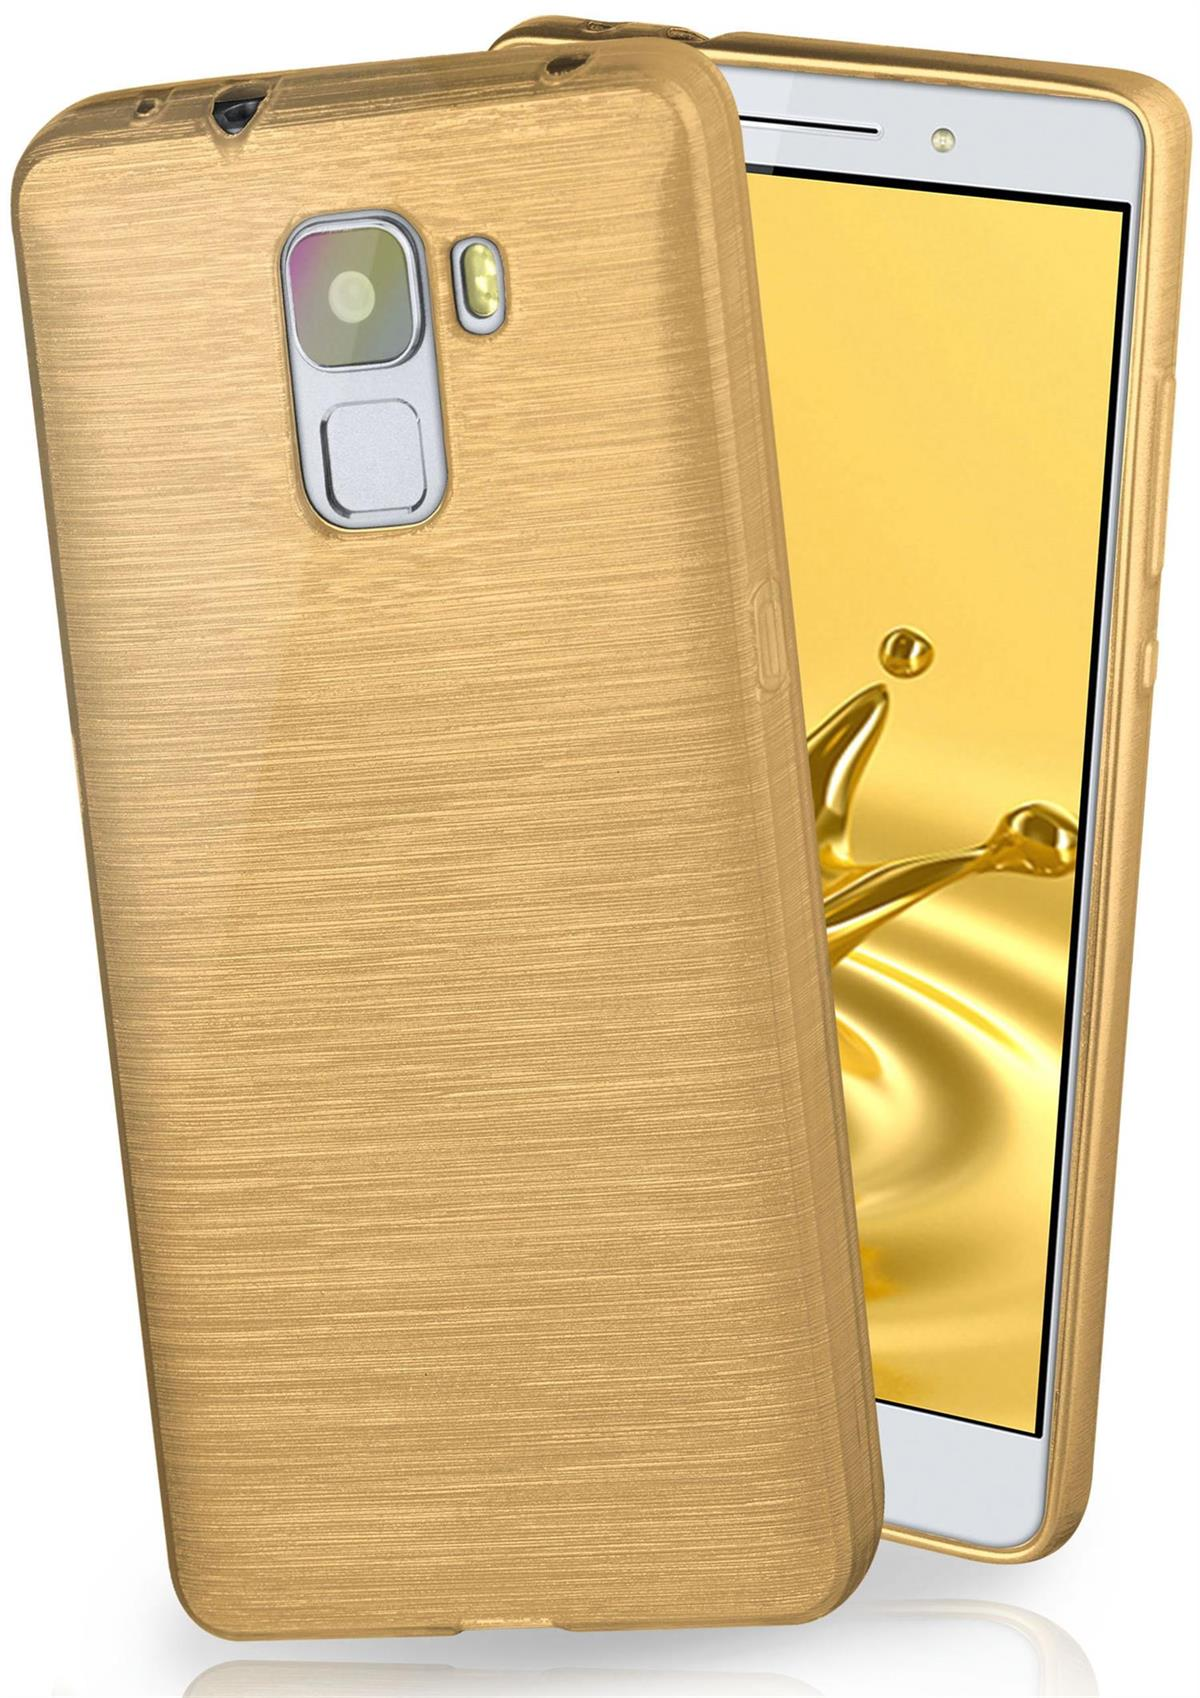 MOEX Honor Brushed Huawei, Ivory-Gold Backcover, 7, Case,